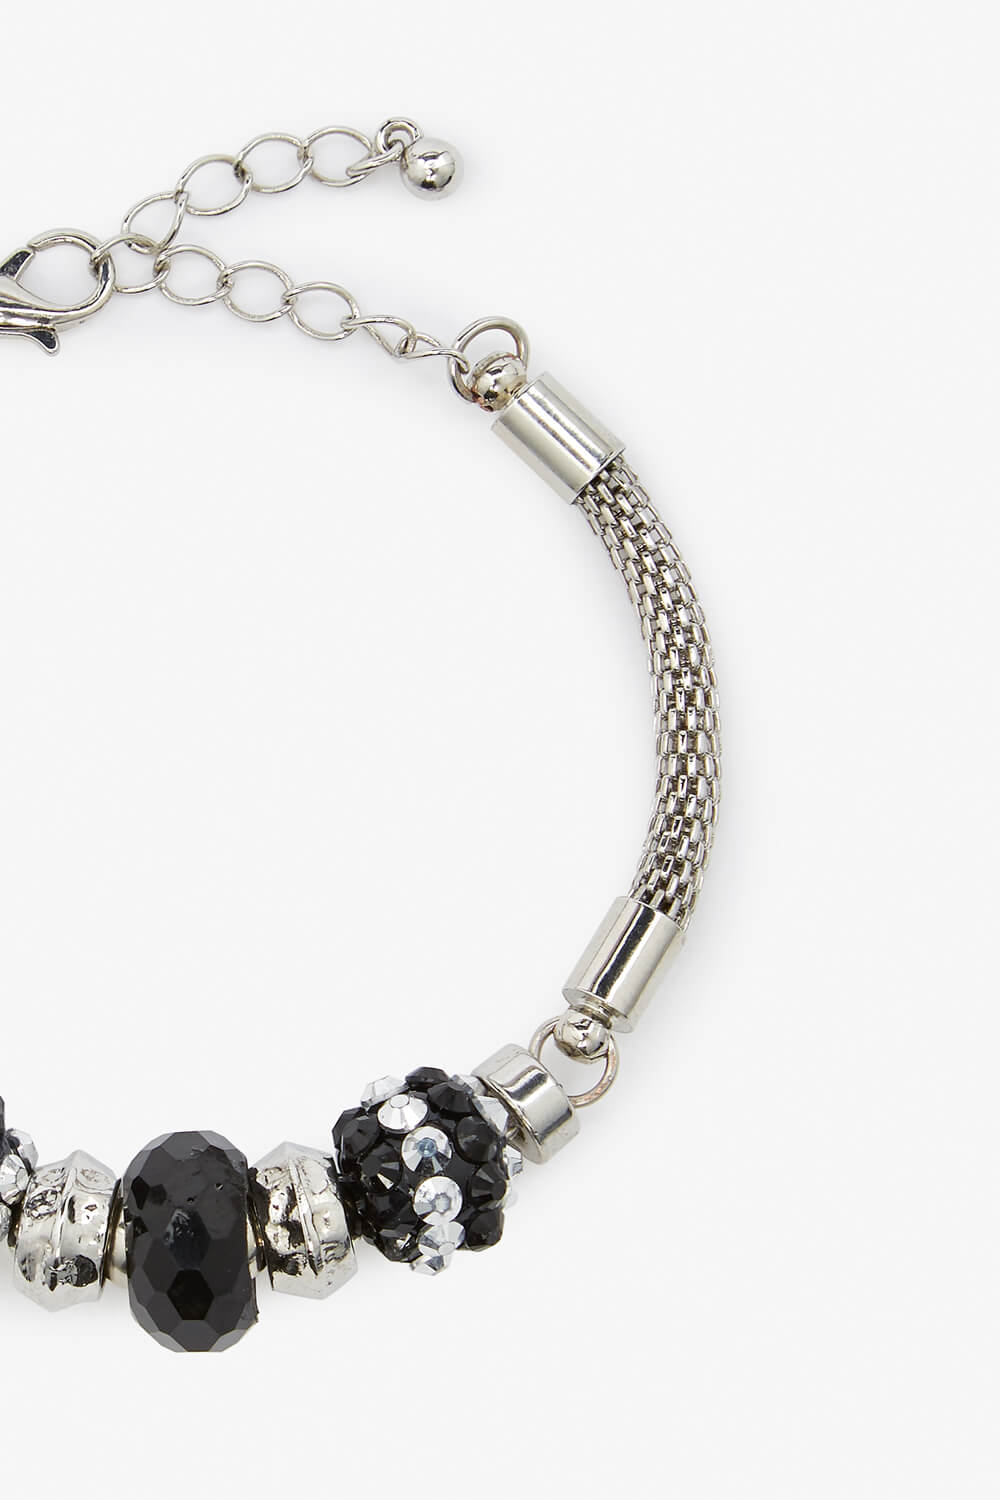 Silver Textured Charm Bead Bracelet, Image 2 of 6